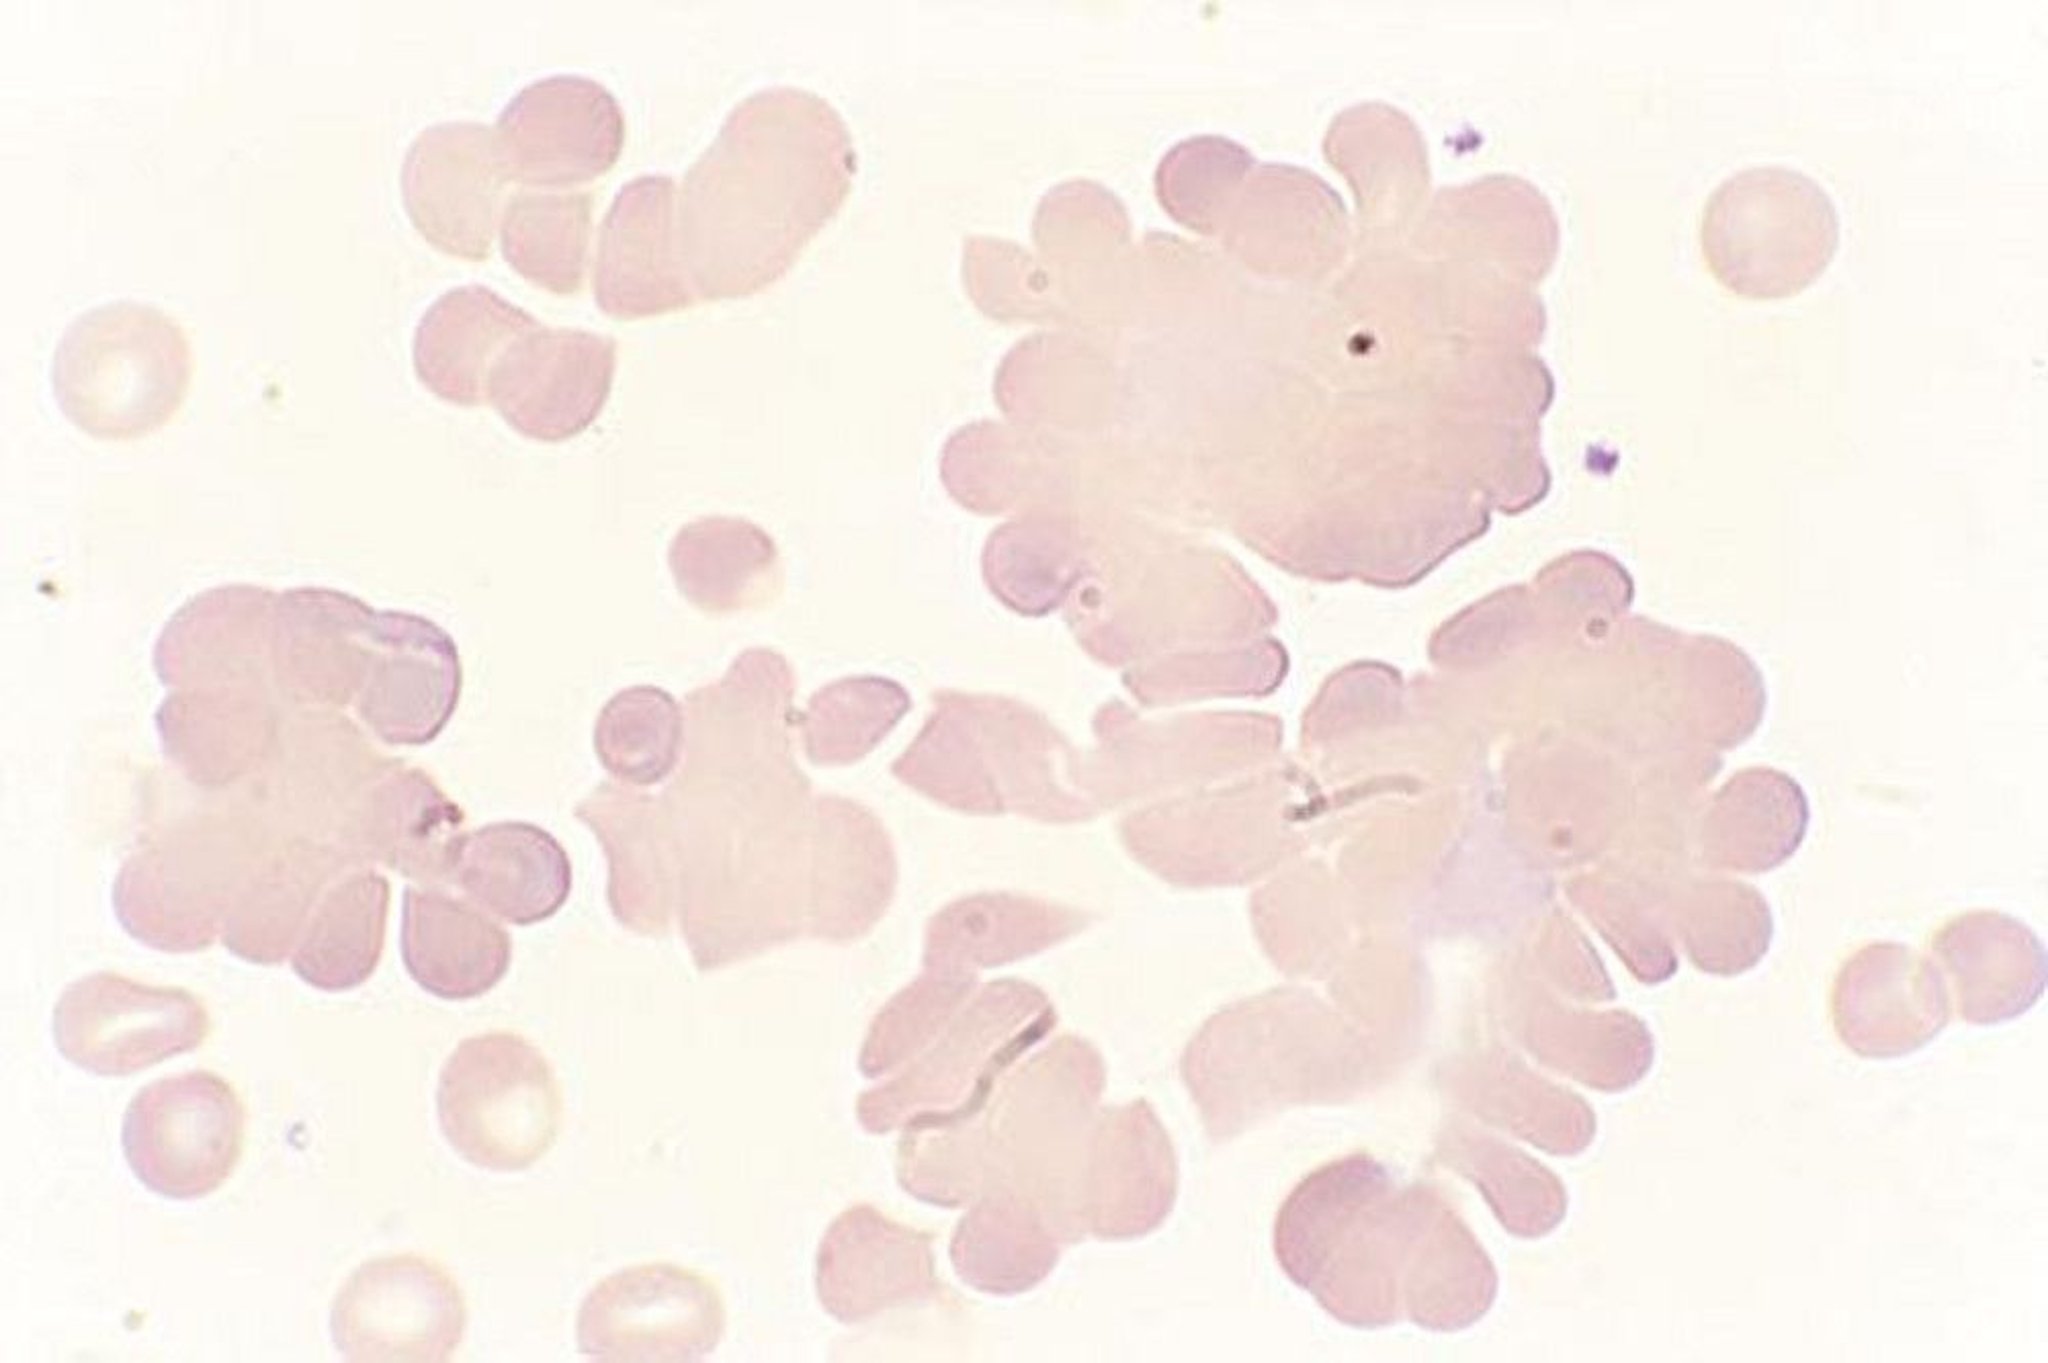 Red Blood Cell Clumping in Cold Agglutinin Disease